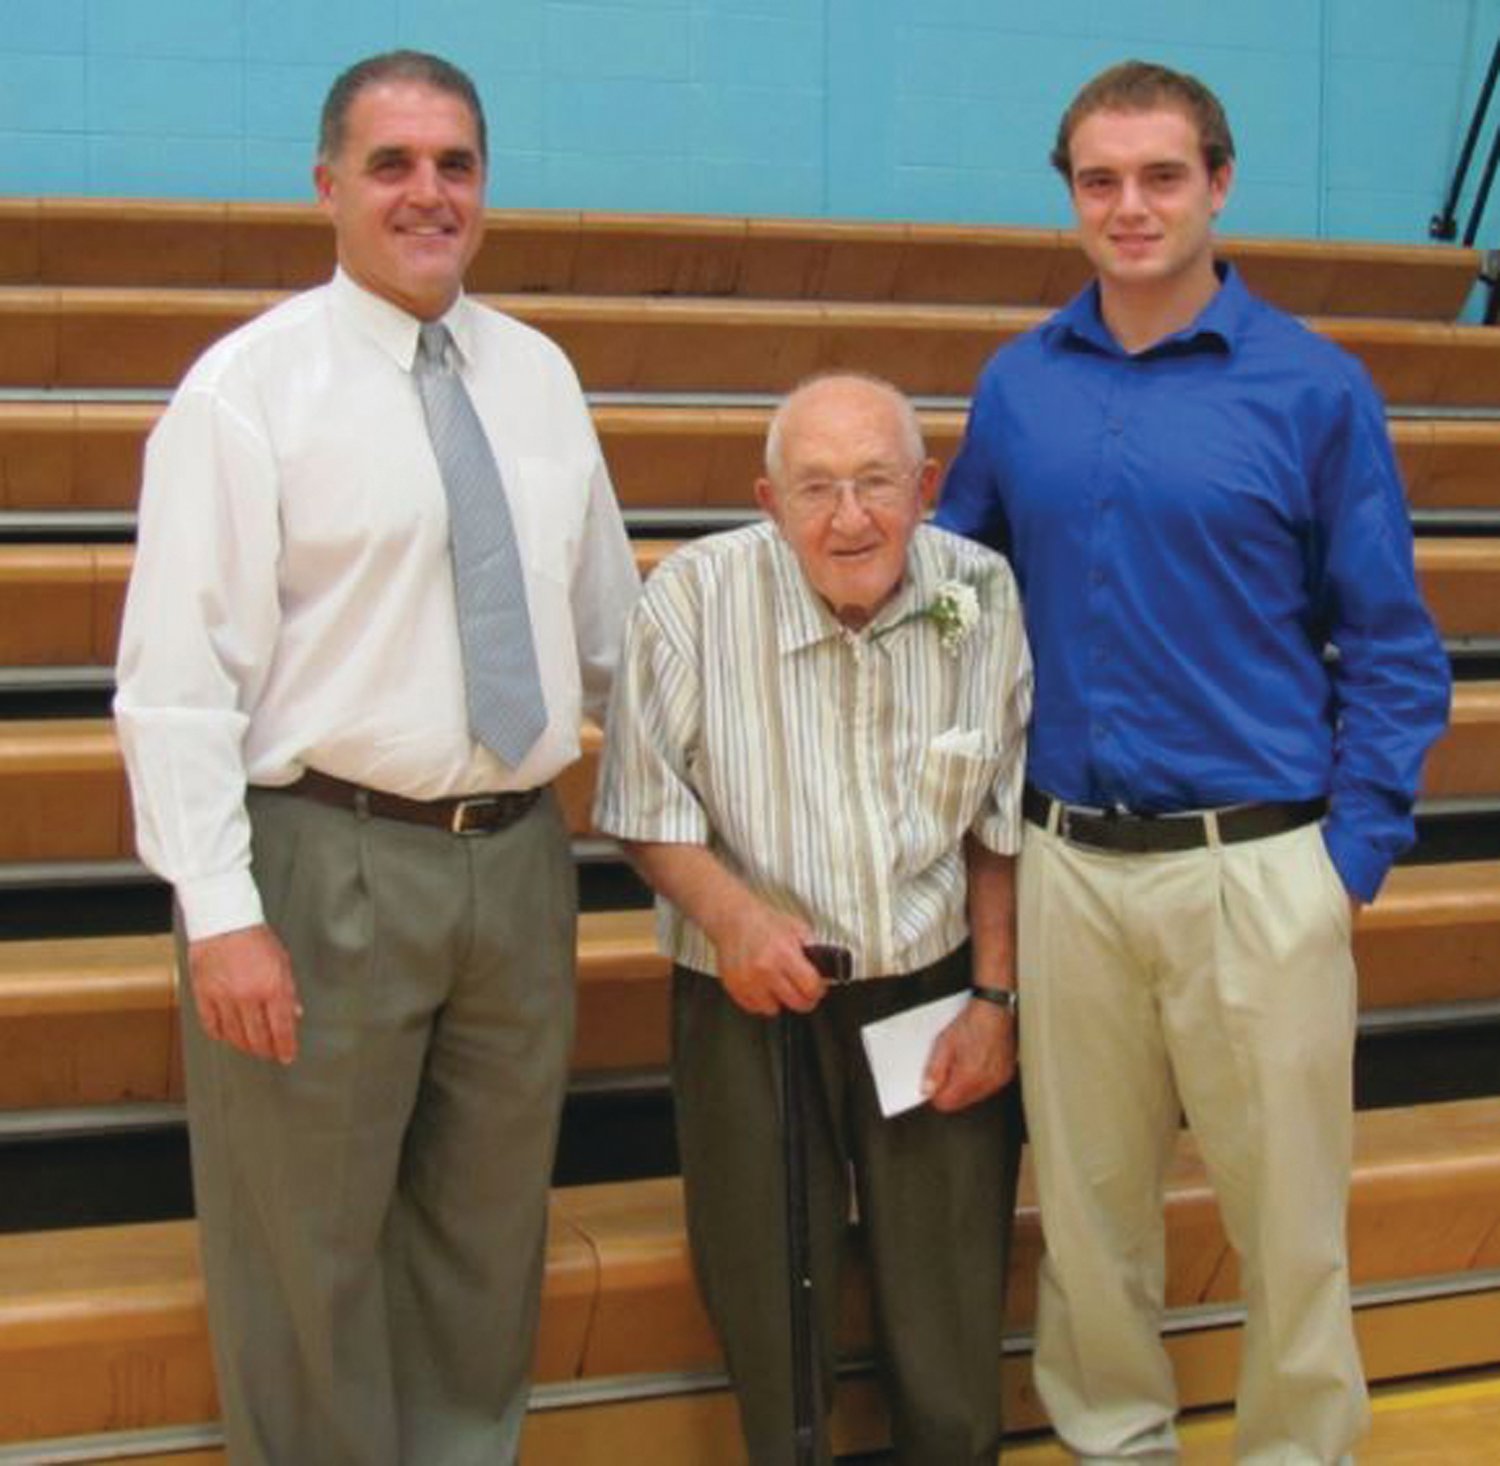 FAMILY BUSINESS: Tom Centore (left) joins his father Tony (center) after he was inducted into the Johnston High School Athletic Hall of Fame back in 2012. Alongside is Tom’s son Jason
(right), who would go on to coach under his father for Cranston East.